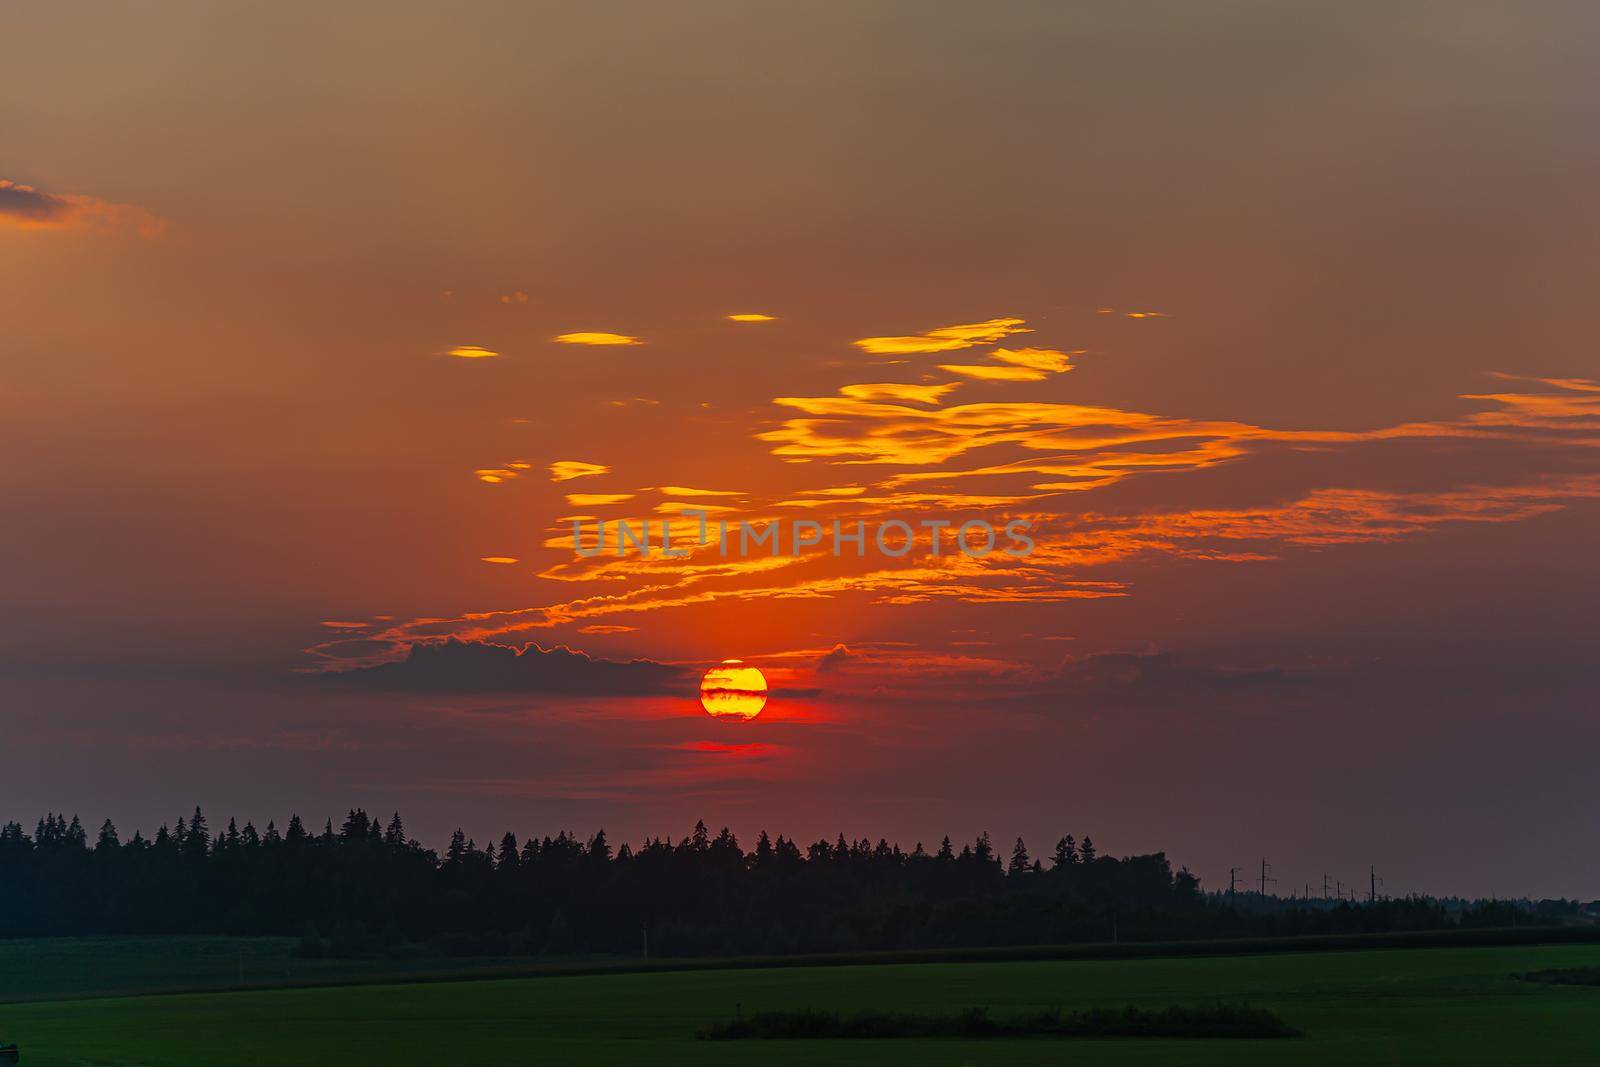 Sunset. The sun sets behind clouds against a background of green forest and fields. Stock photography